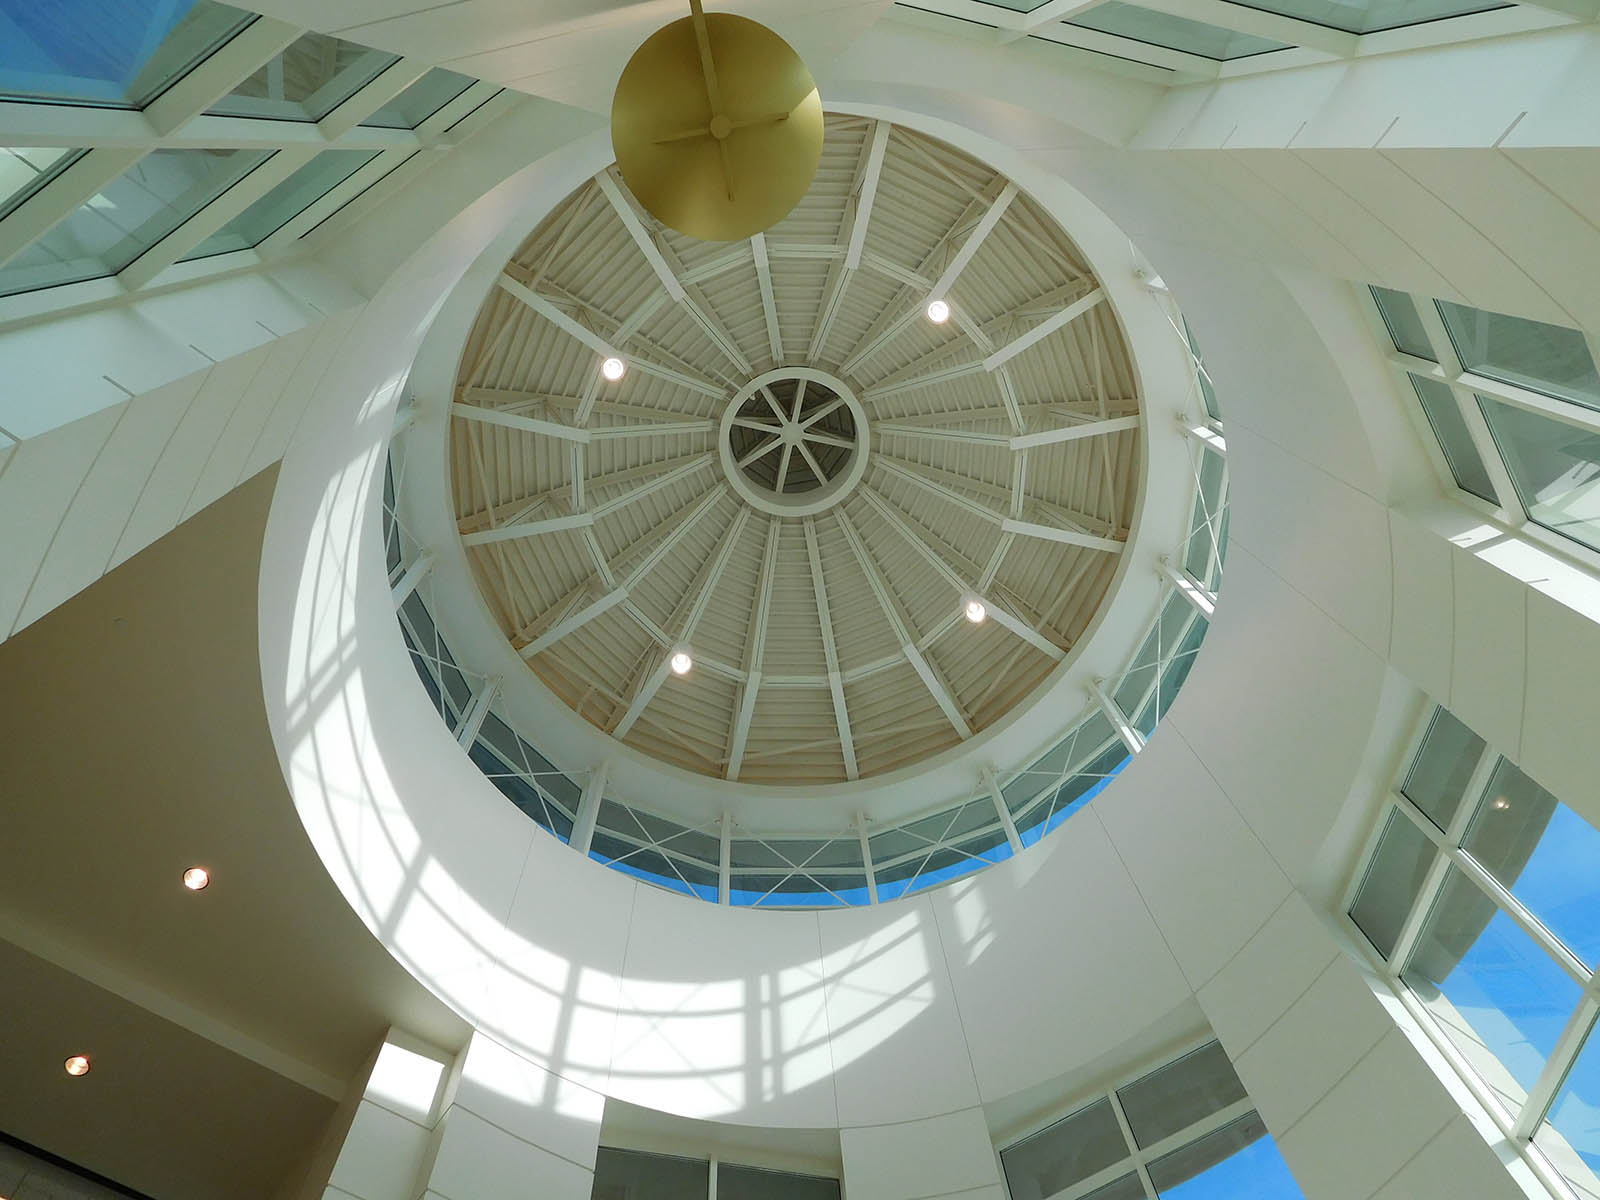 Dome ceiling and lighting inside the KI Convention Center entrance